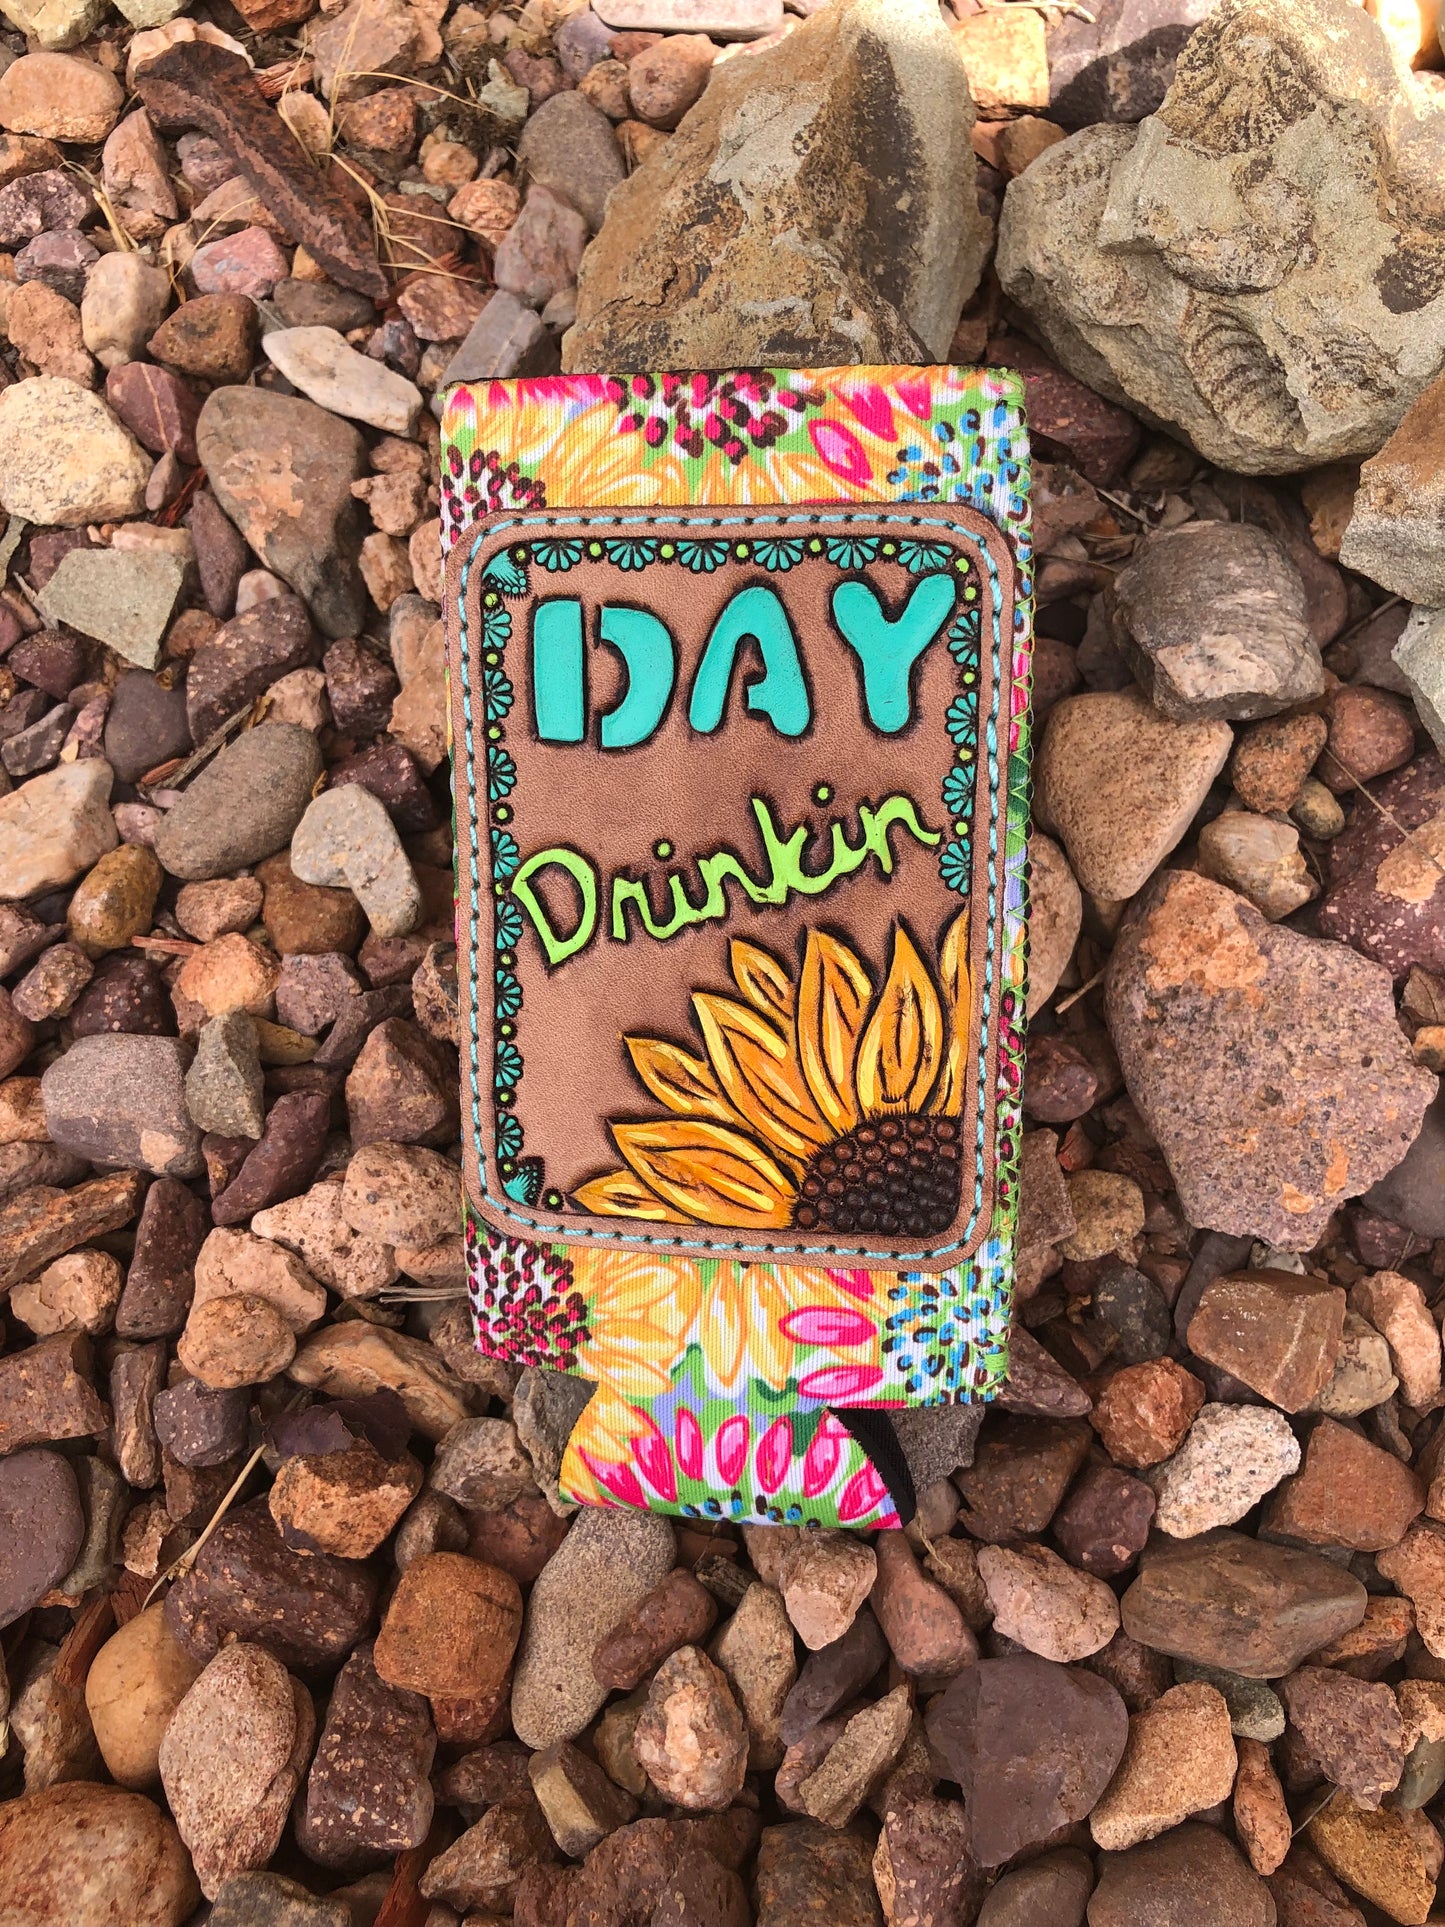 Western tooled leather day drinkin slim can koozie